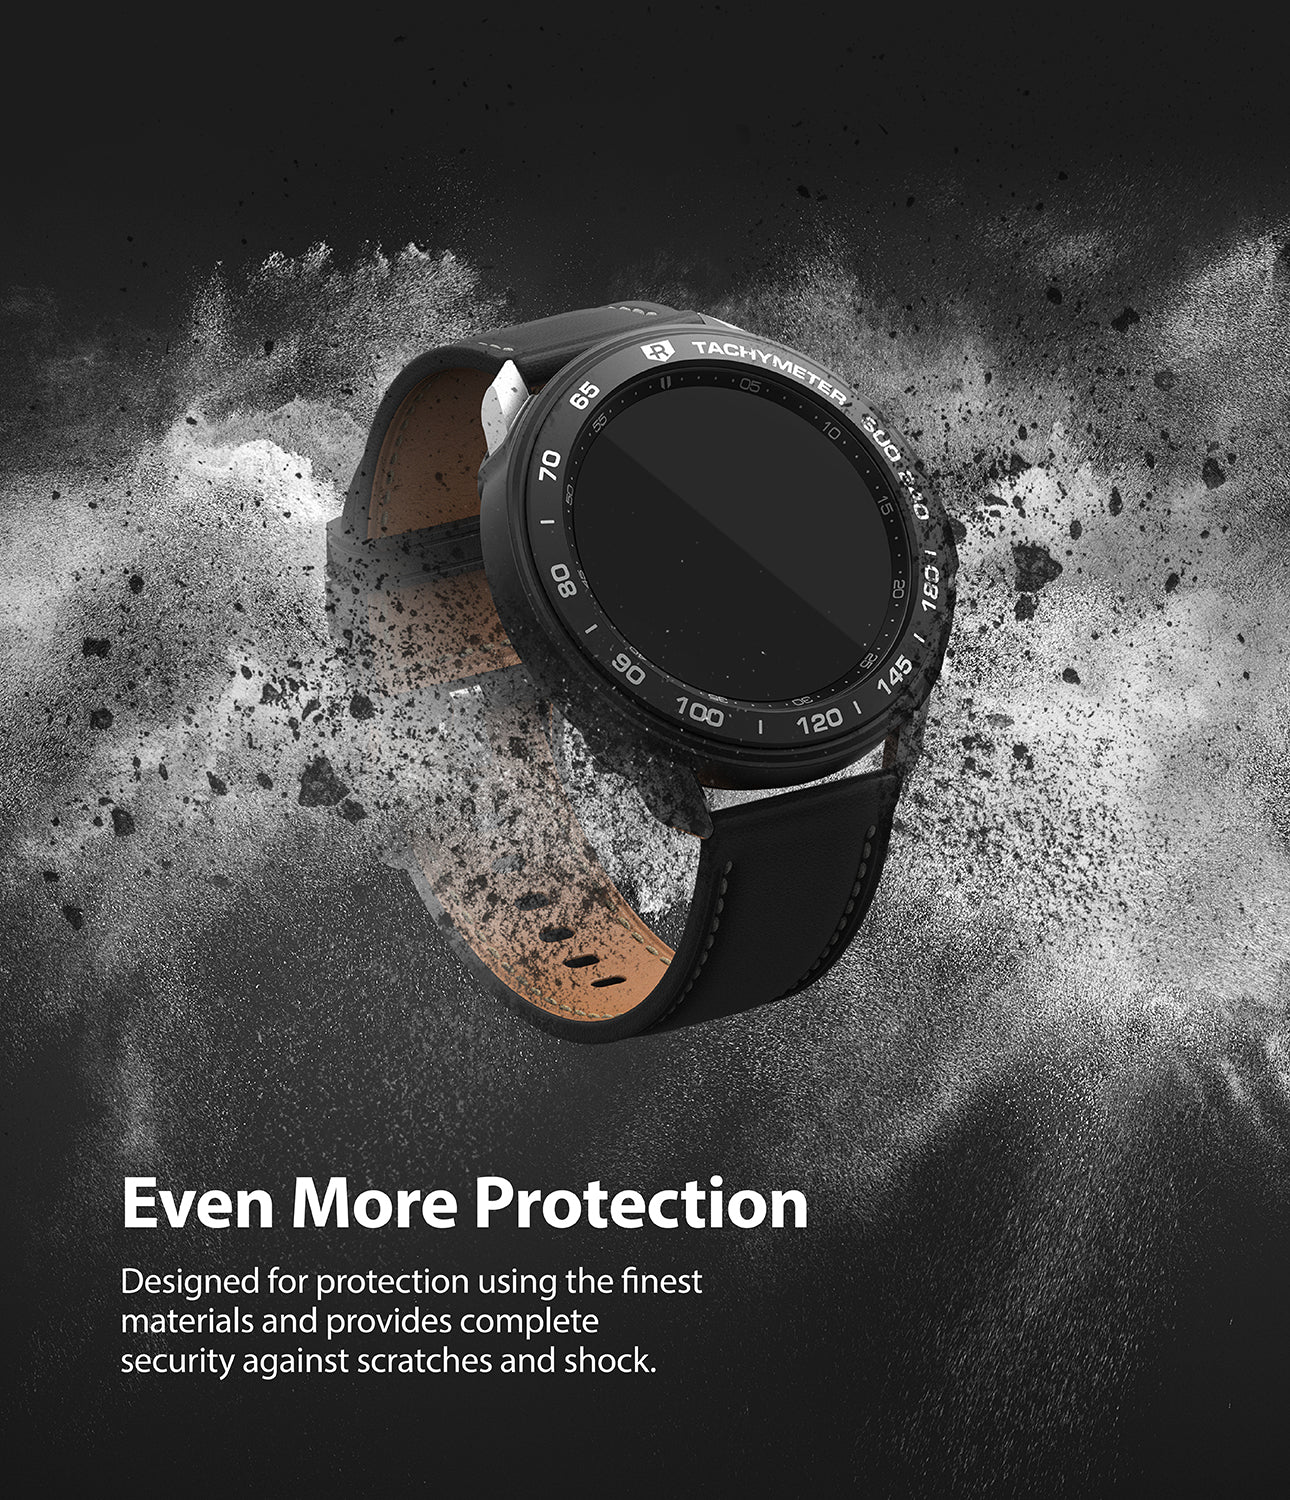 designed for proetction using the finest materials and provides complete security against scratches and shock